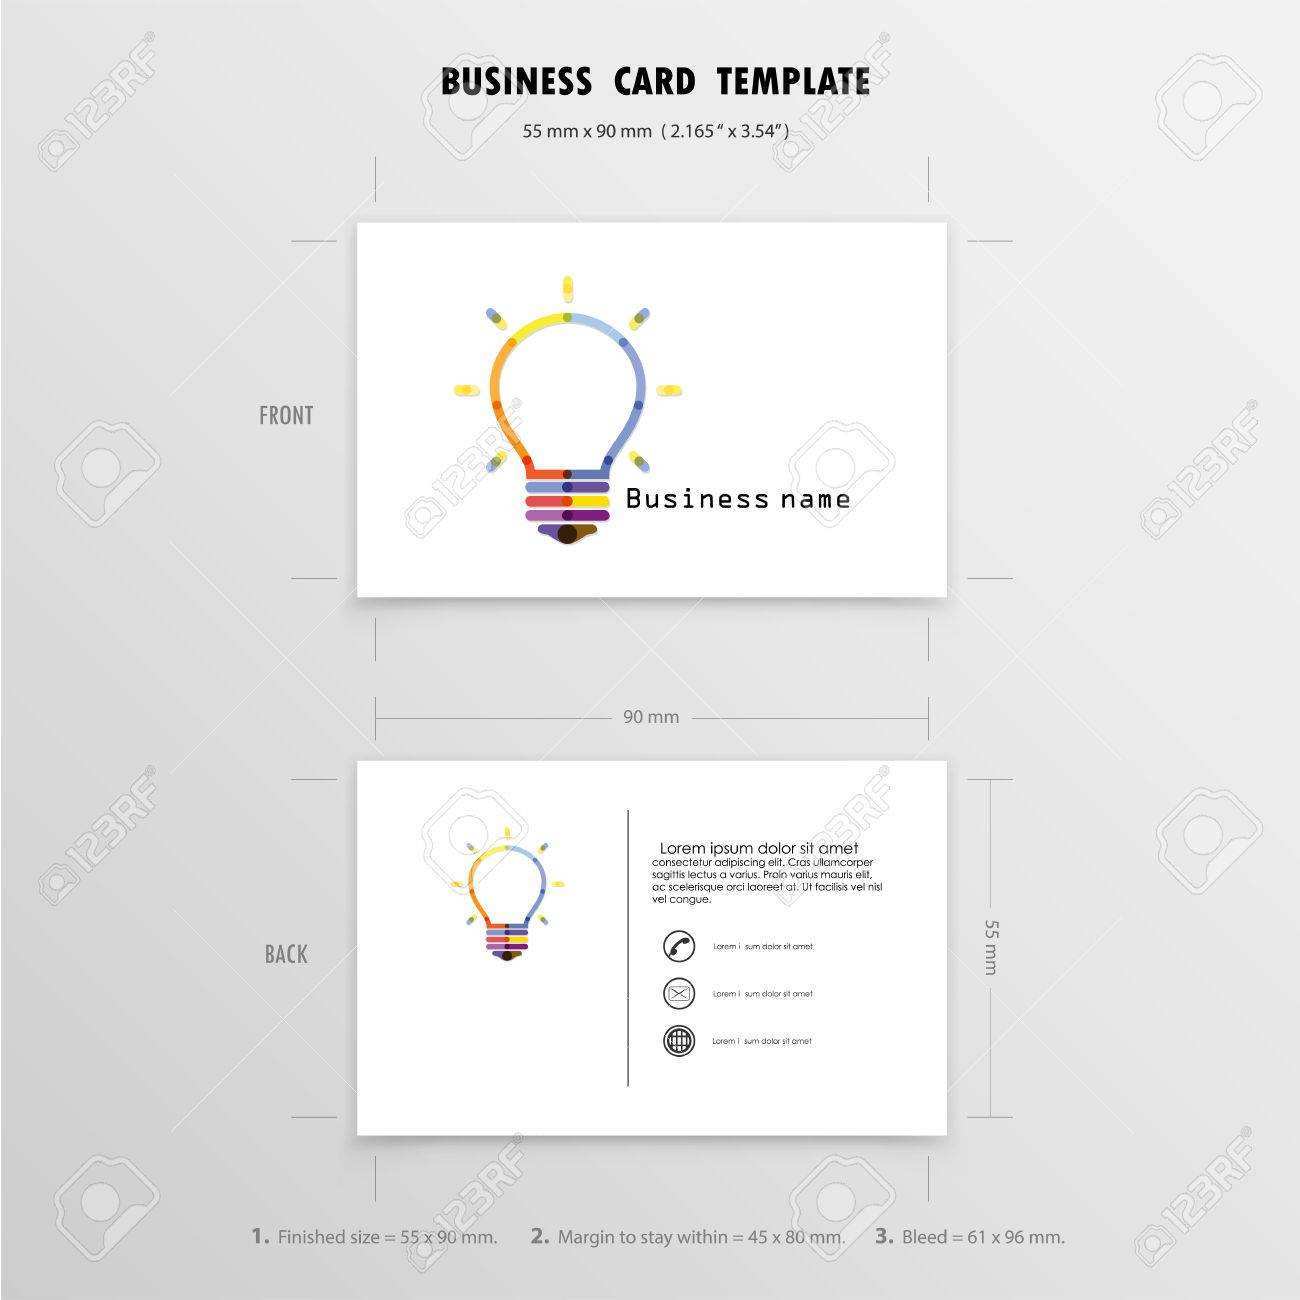 24 Visiting Business Card Size Template Vector Download for Business Card Size Template Vector